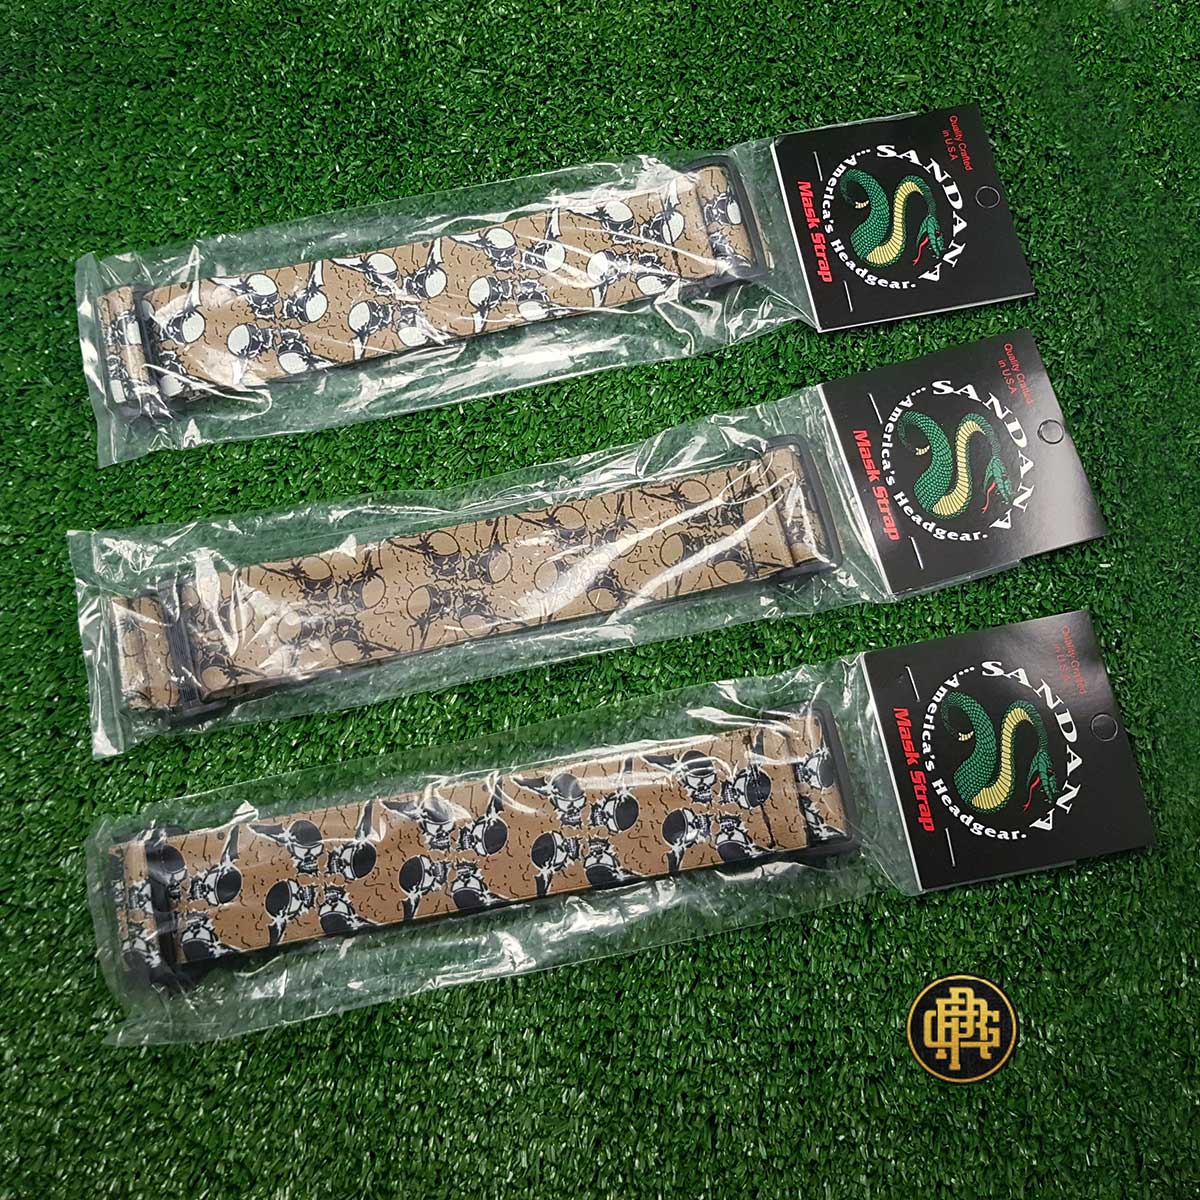 Sublimation Goggle Strap - Flying Skull - Earth Tone Collection